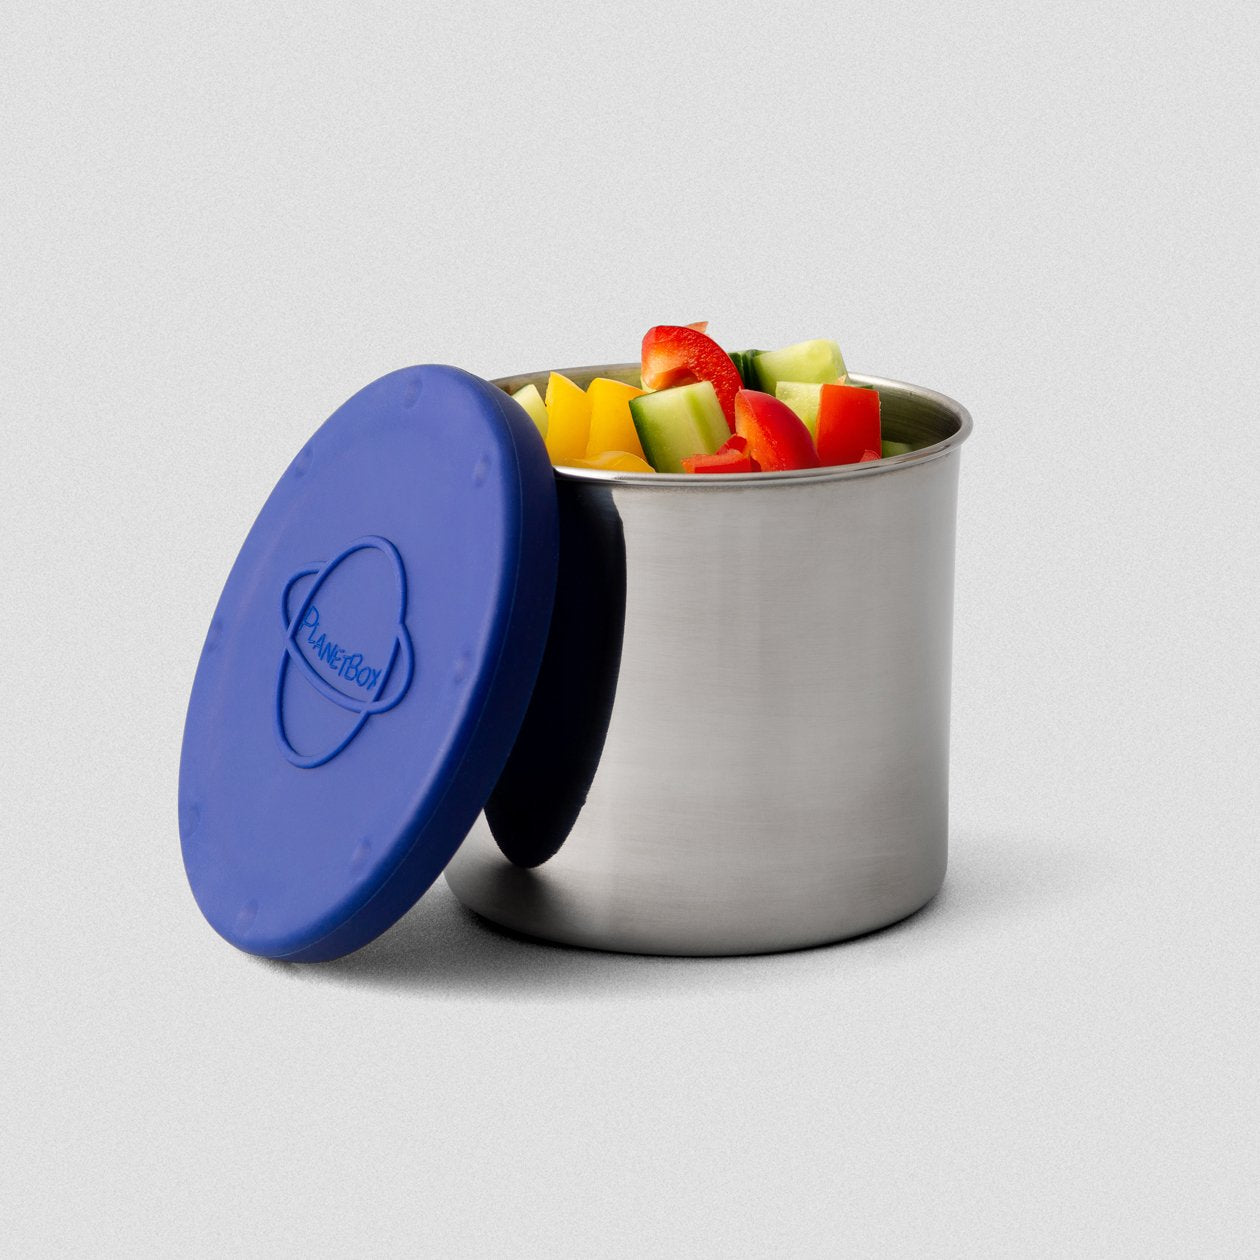 PlanetBox | Silo - 2.4 Cup Snack Container